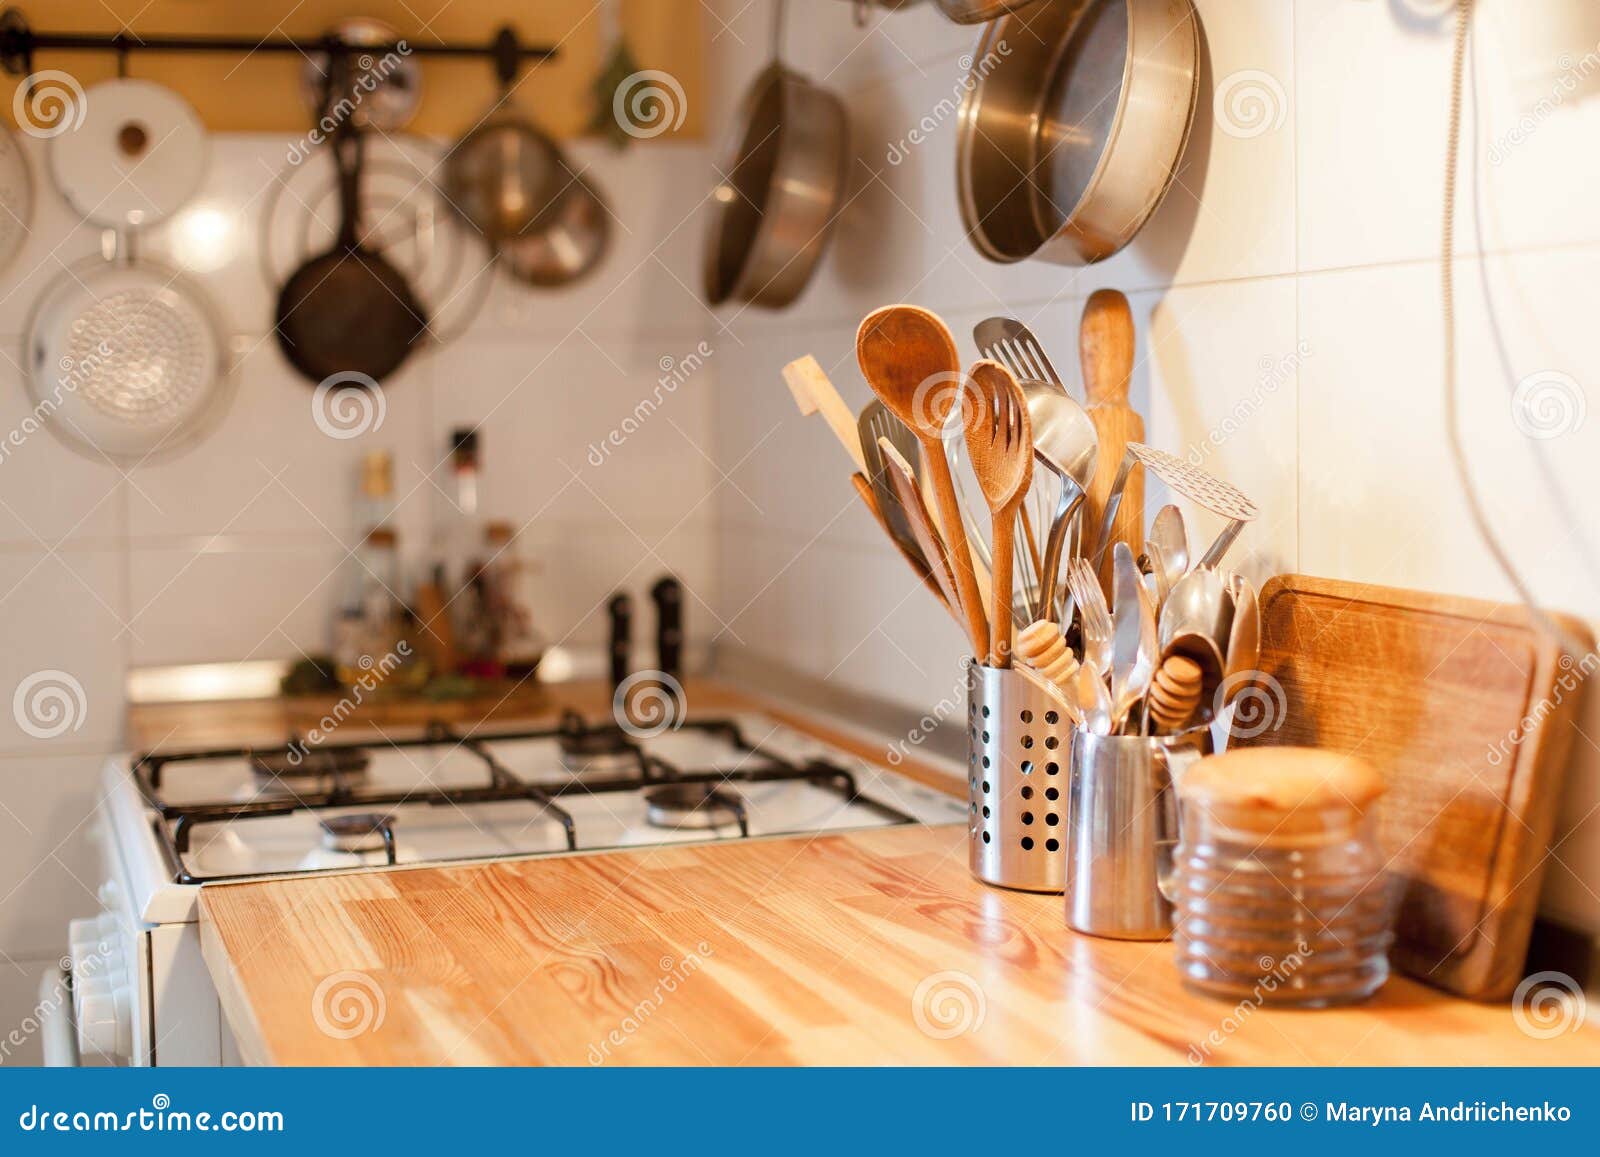 Blurred Kitchen Background With Linen Towel And White Cupboard